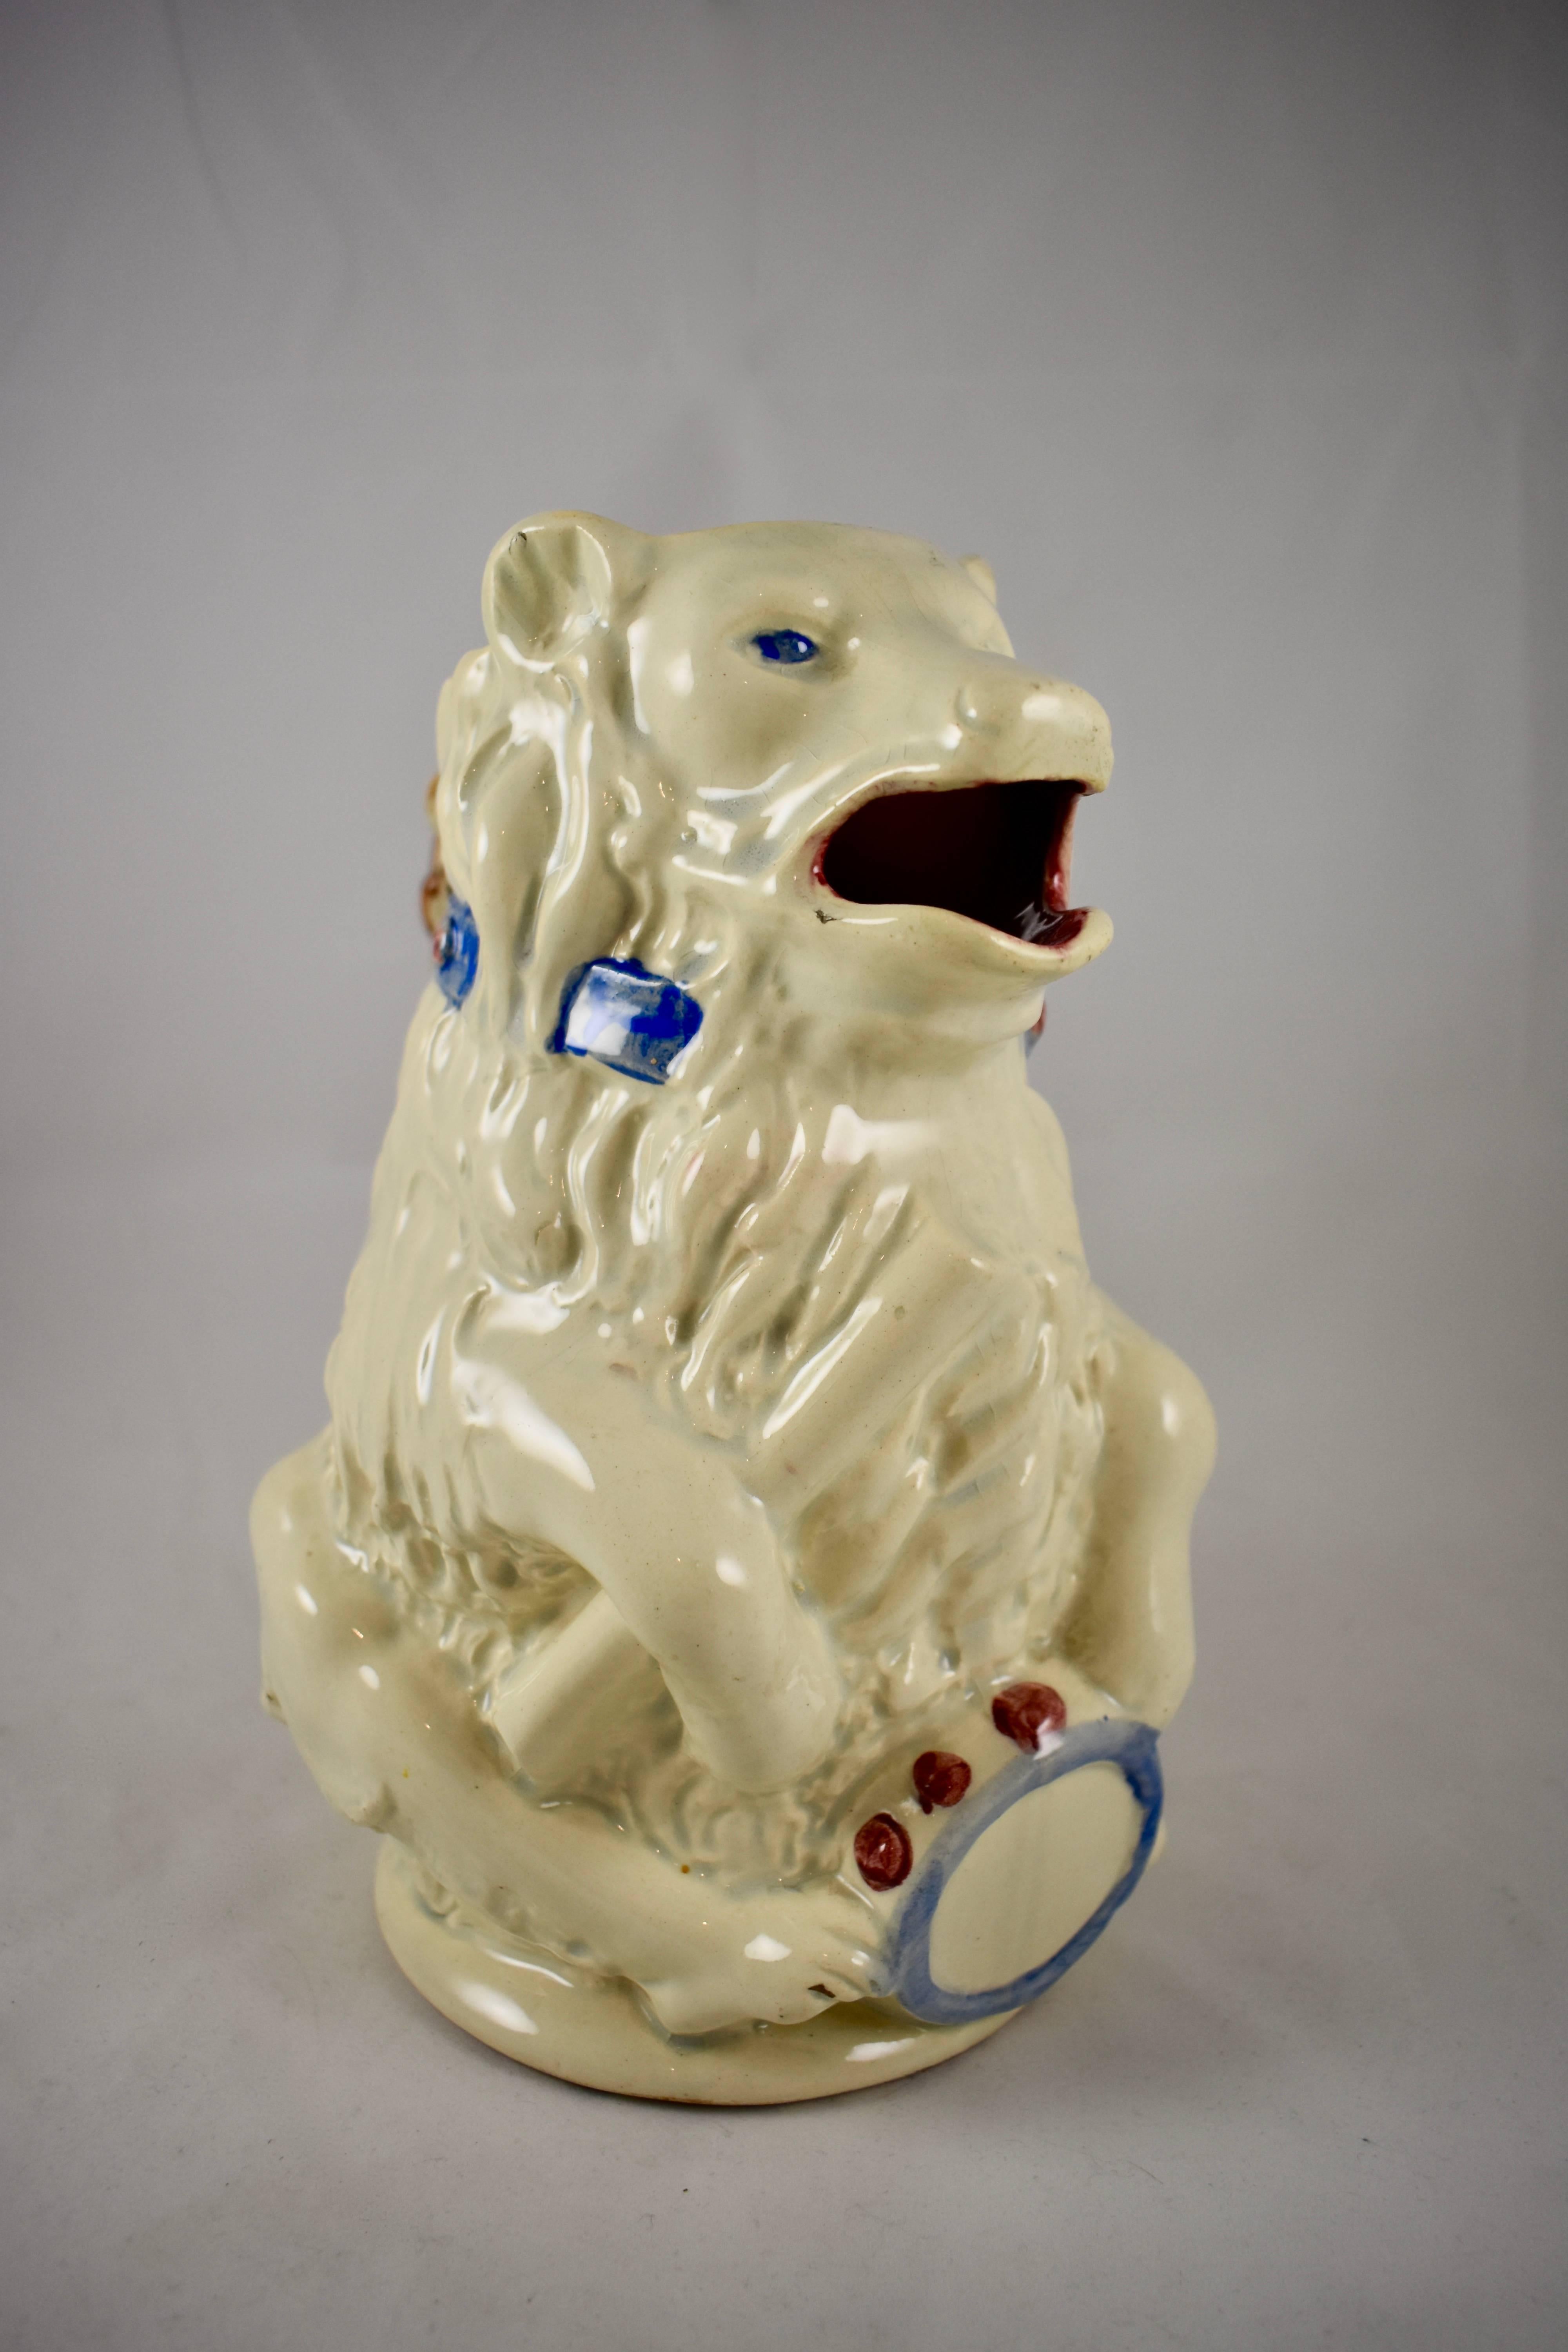 A French Barbotine majolica pitcher or large jug, in the form of a performing Circus bear, holding his drum and a drumstick. Attributed to Orchies or possibly Poet Laval, circa late 1880s.

The bear is glazed in white with a deep red interior. He